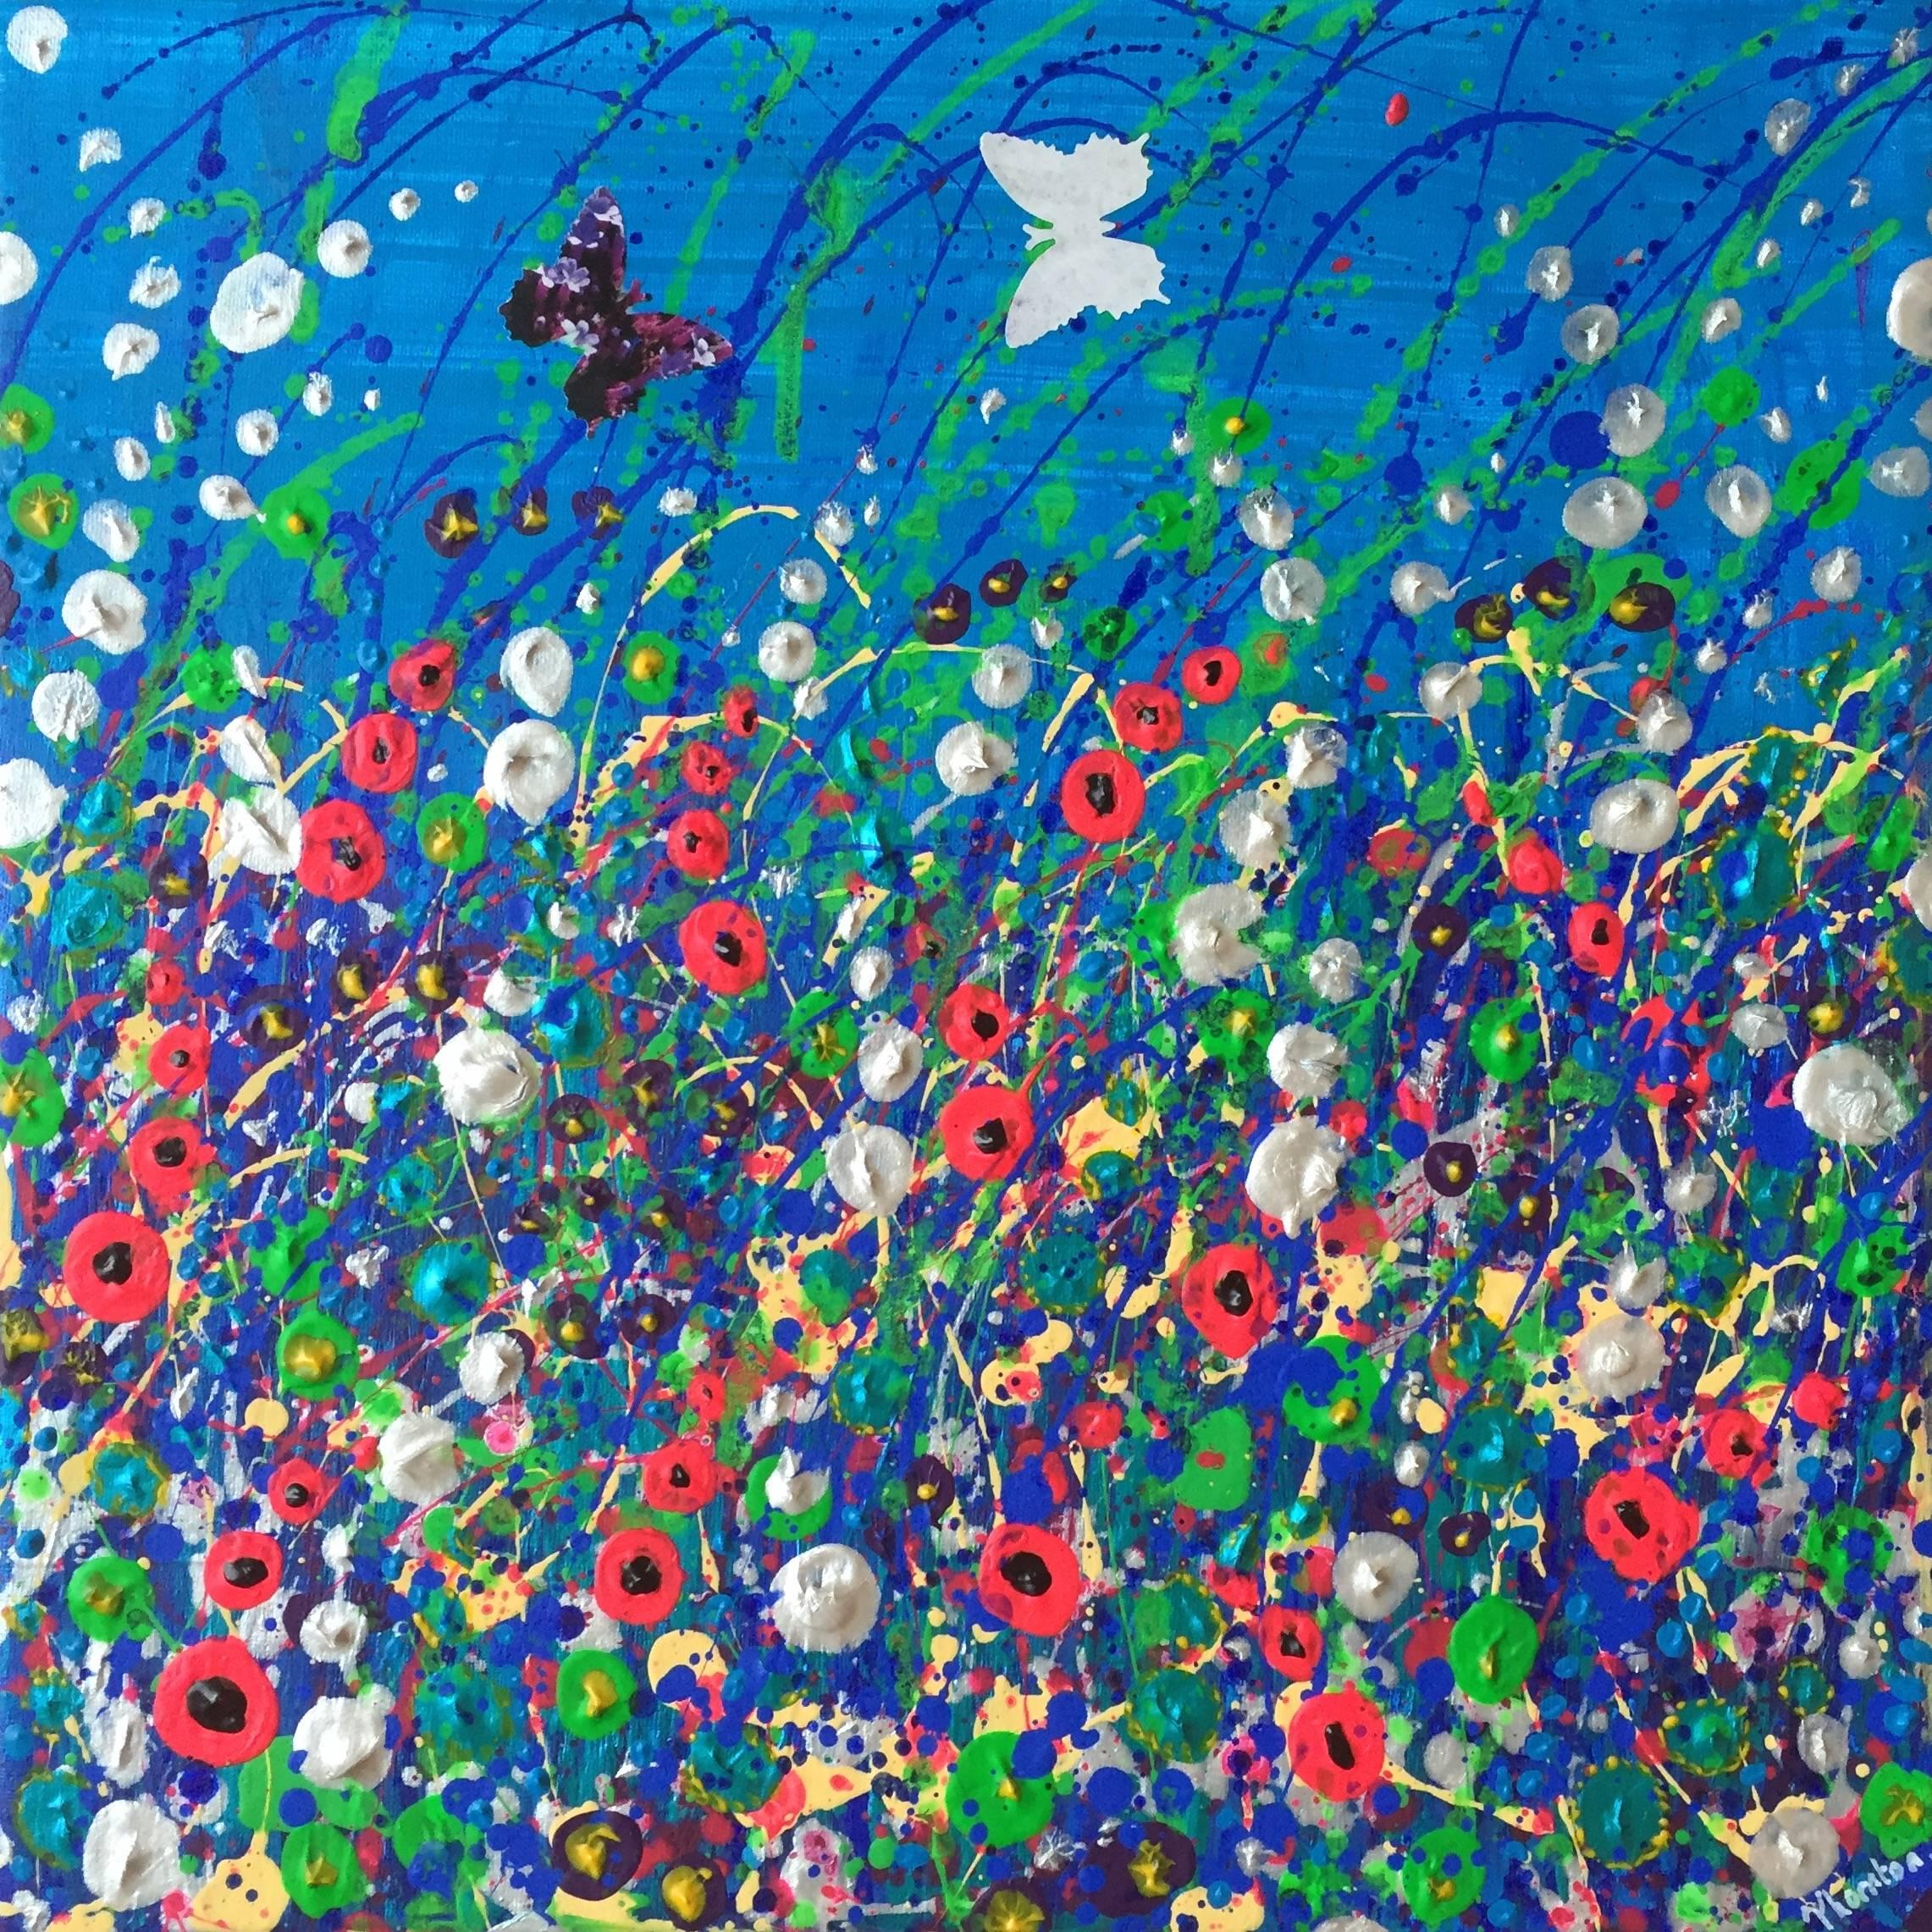 Tracey Thornton Landscape Painting - Sky Skimming, Original, Mixed Media, Diamond Dust, Collage, Pattern. Signed